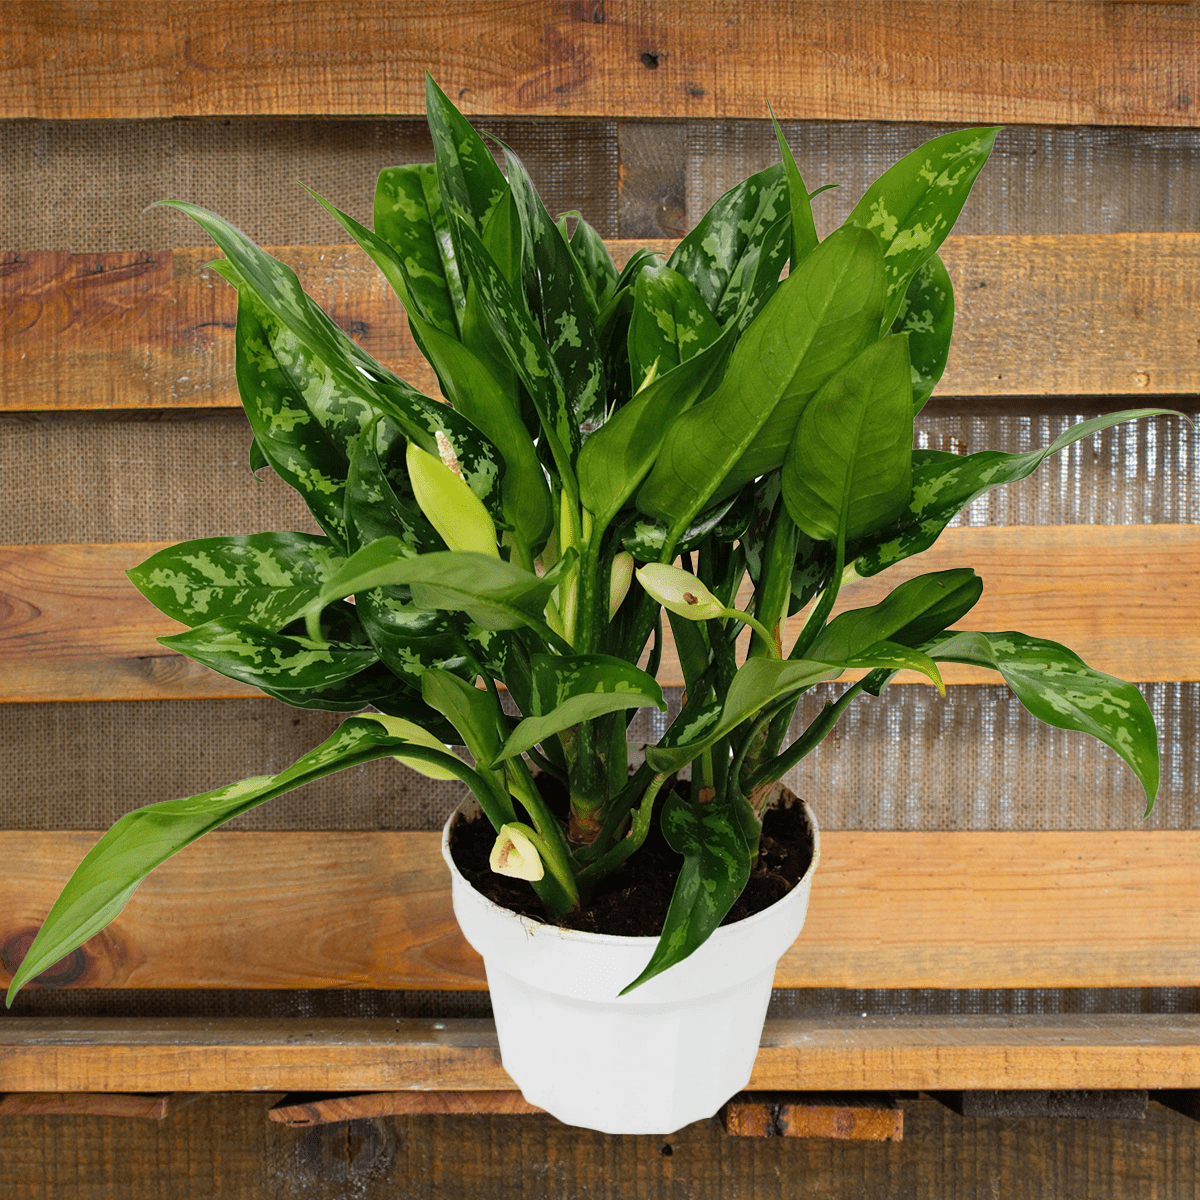 Aglaonema Maria Chinese Evergreen House Plants for Sale - 6in Nursery Pot | Best Indoor Plants & Houseplant Sale | Forget Me Not Flower Market